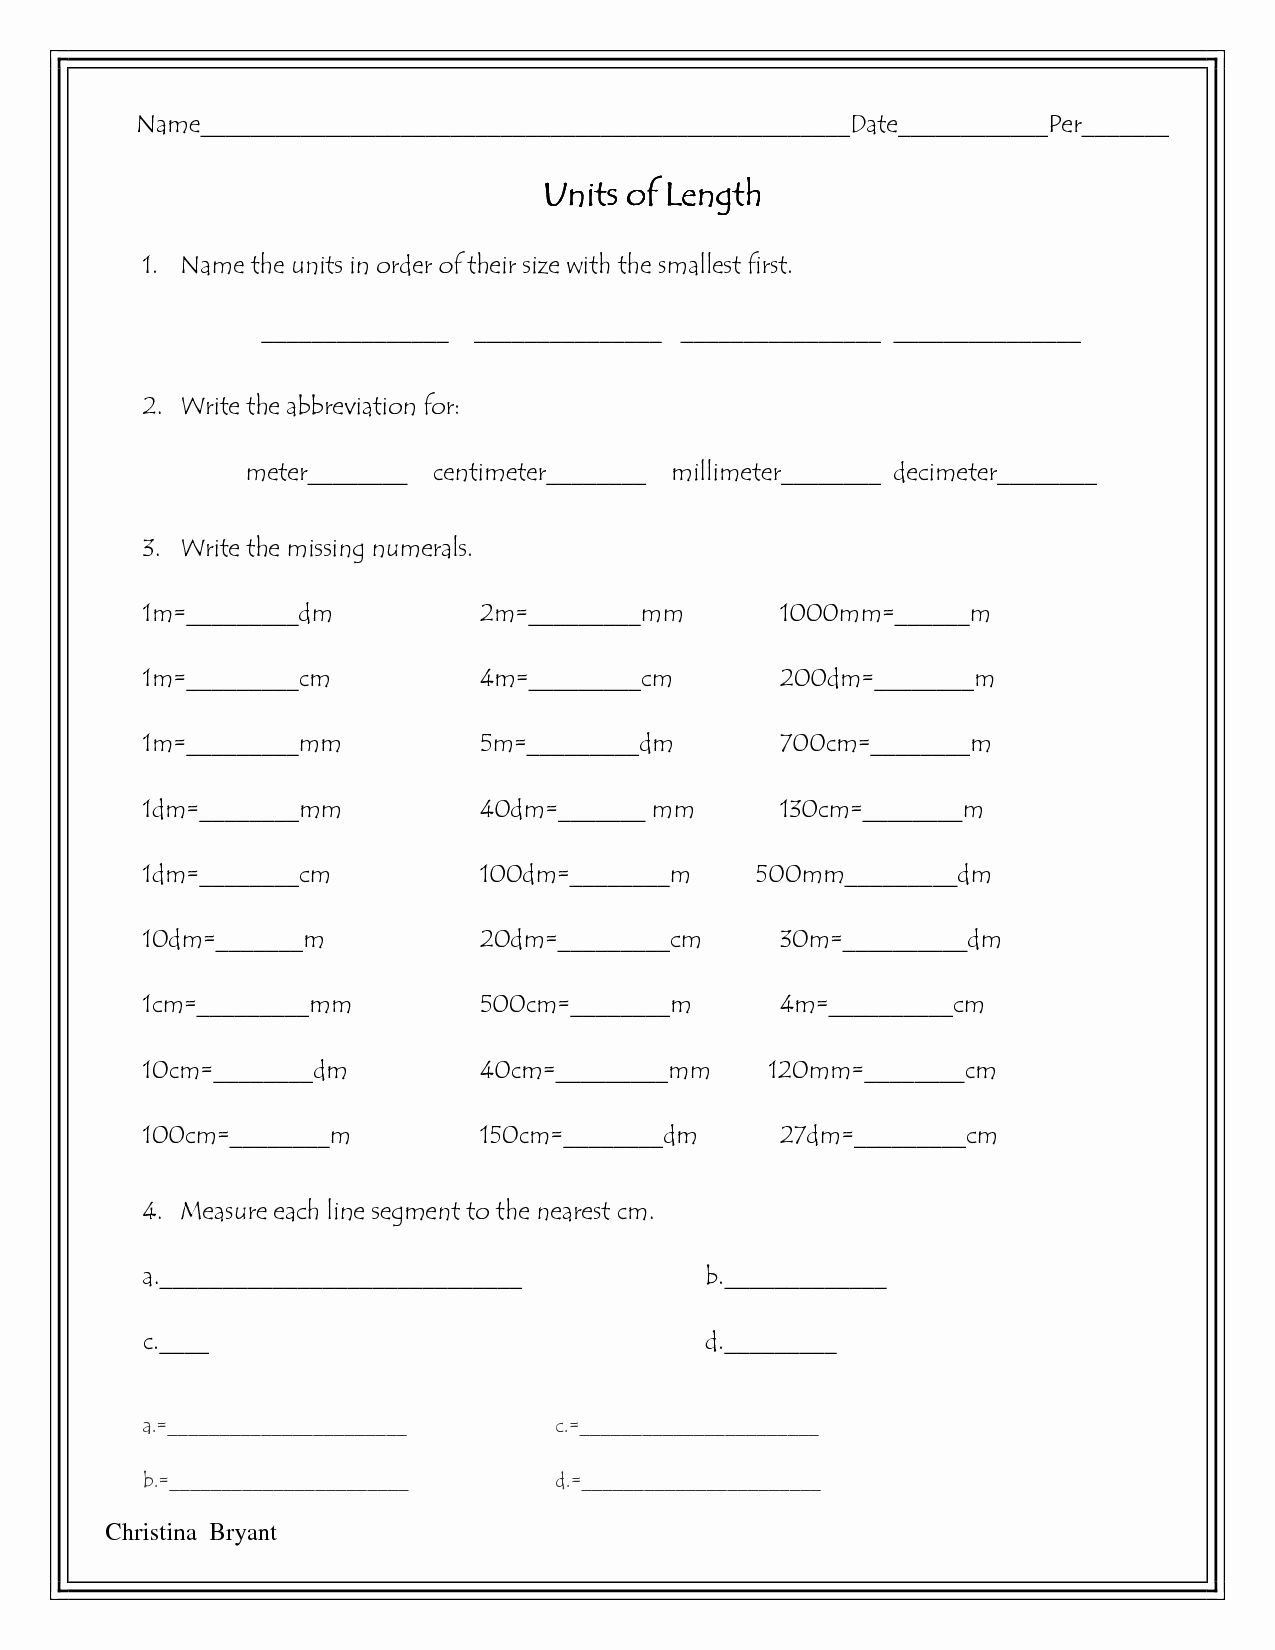 Measuring Units Worksheet Answer Key Lovely 13 Best Of Yards to Inches Worksheets Customary